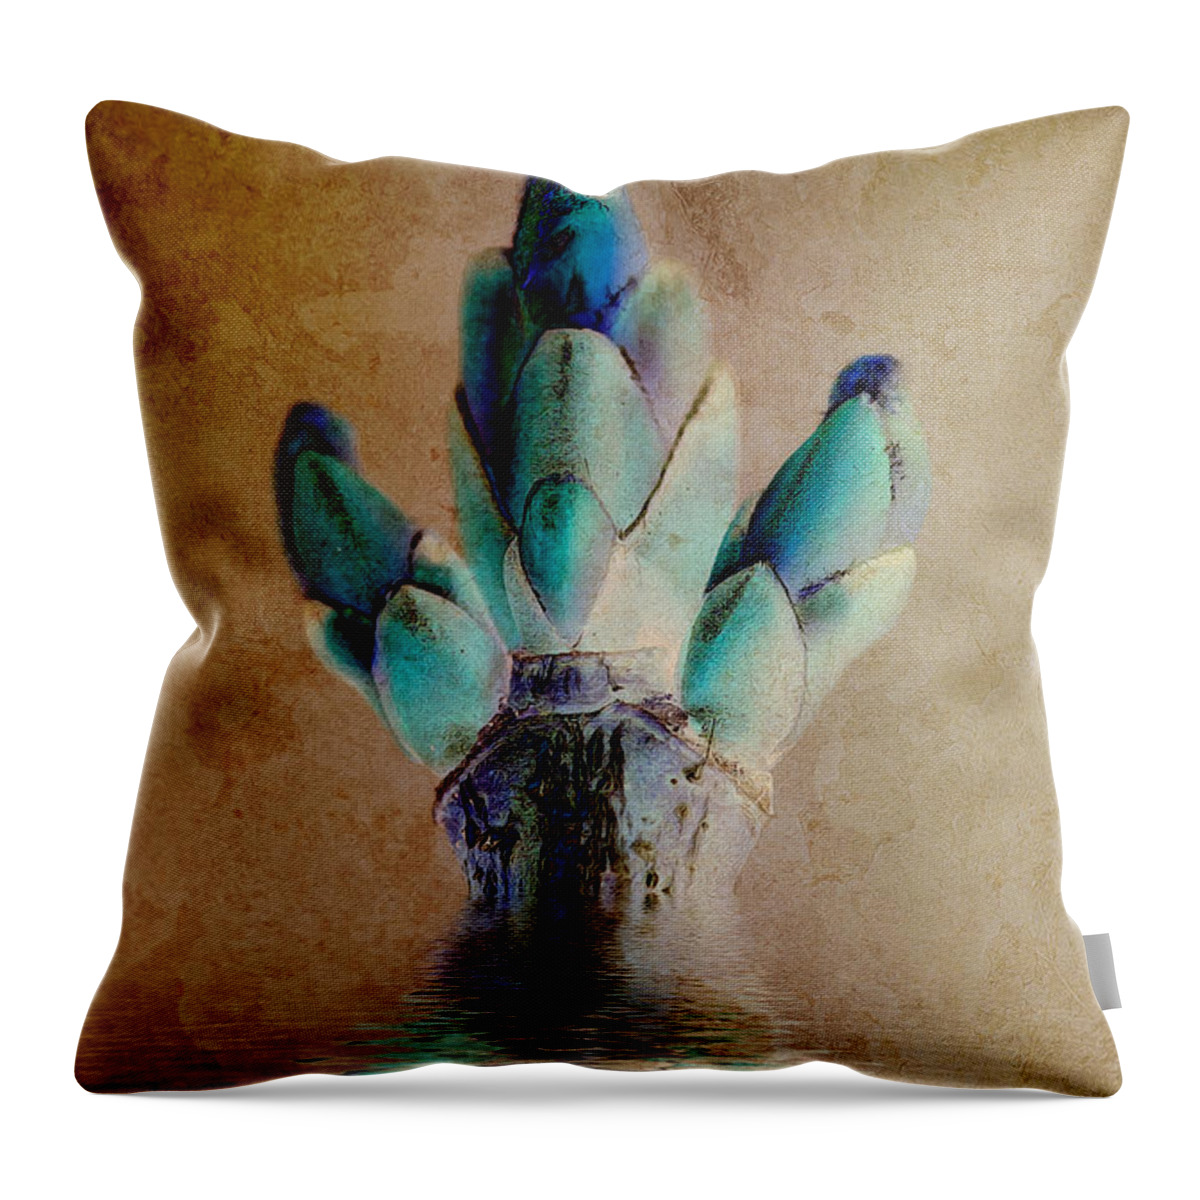 Bud Throw Pillow featuring the digital art Salute by WB Johnston